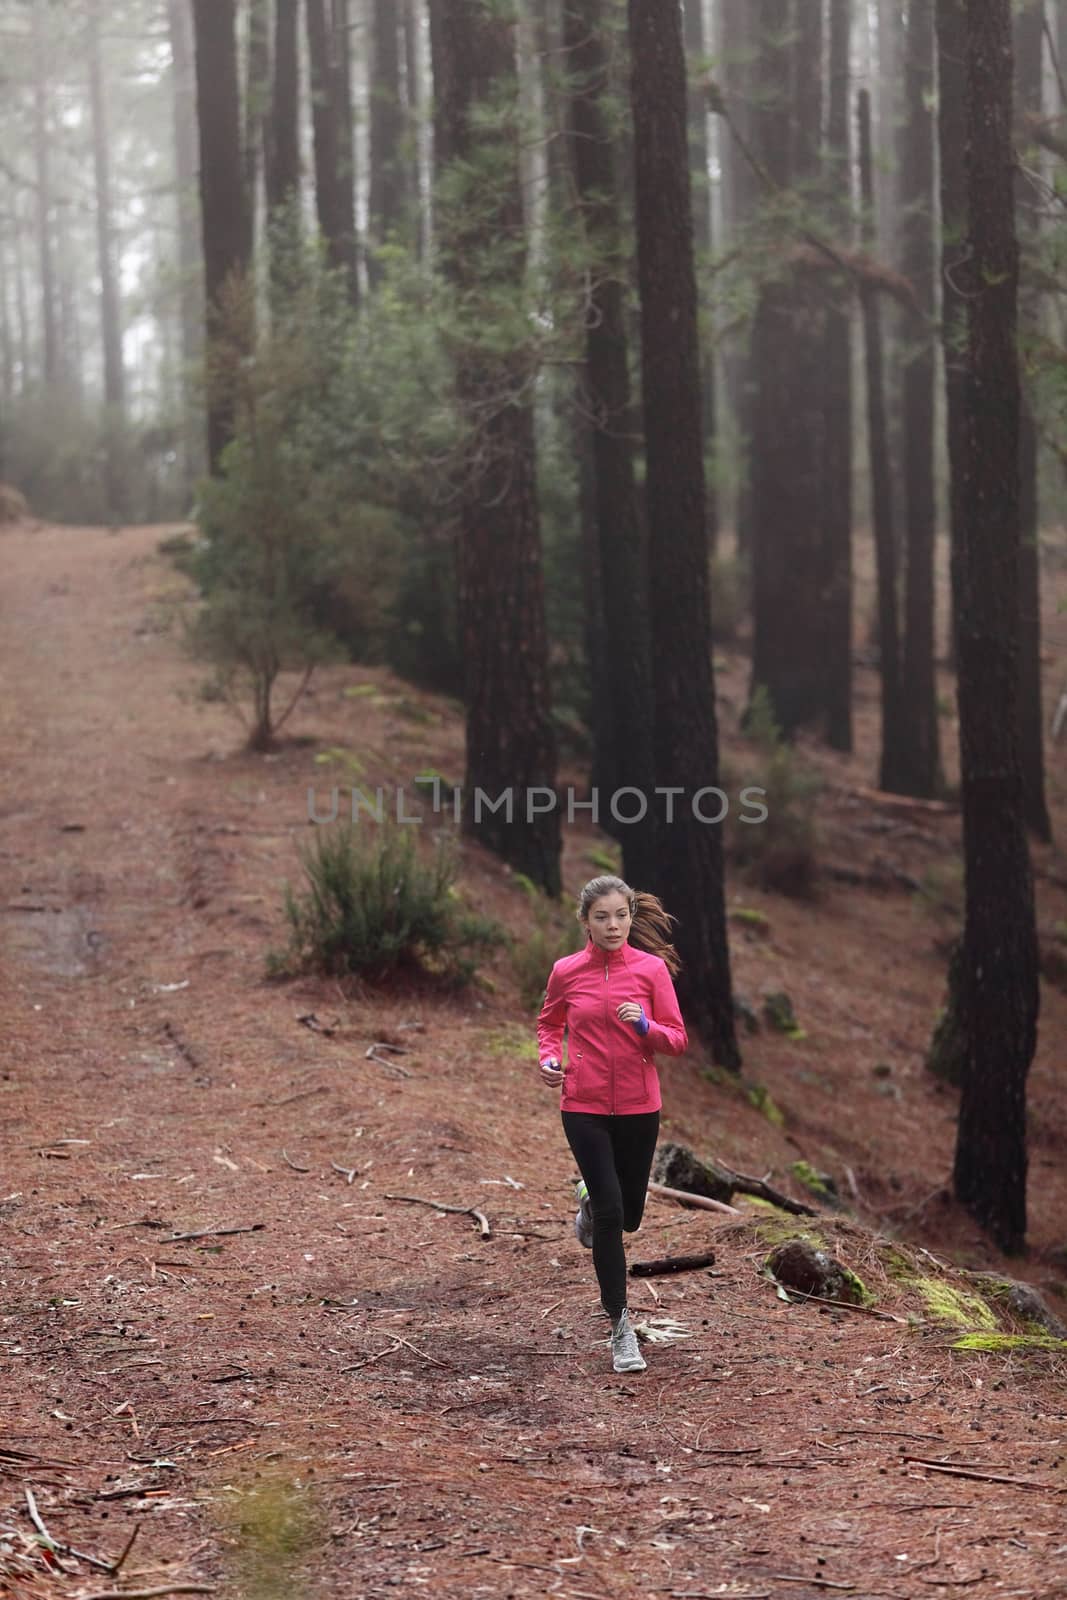 Woman running in forest woods training and exercising for trail run marathon endurance race. Fitness healthy lifestyle concept with female athlete trail runner.